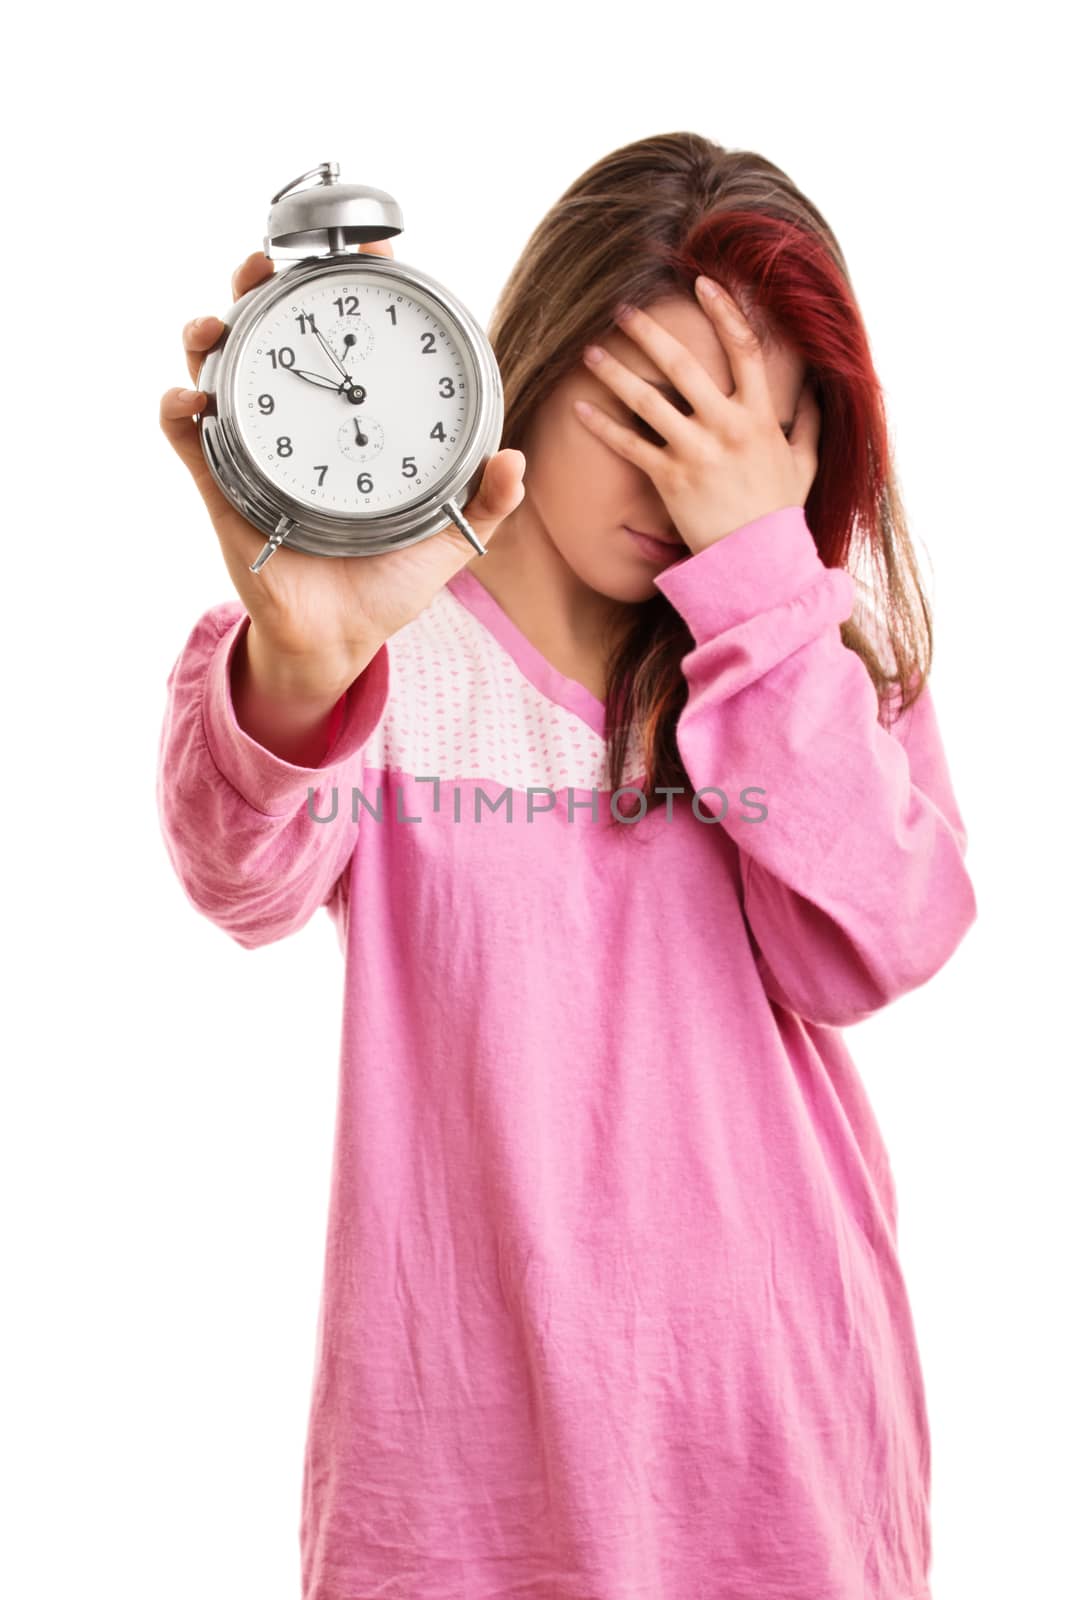 Being late concept. Close up of a young woman in pink pajamas holding an alarm clock and covering her face with her hand, looking tired and annoyed, isolated on white background.